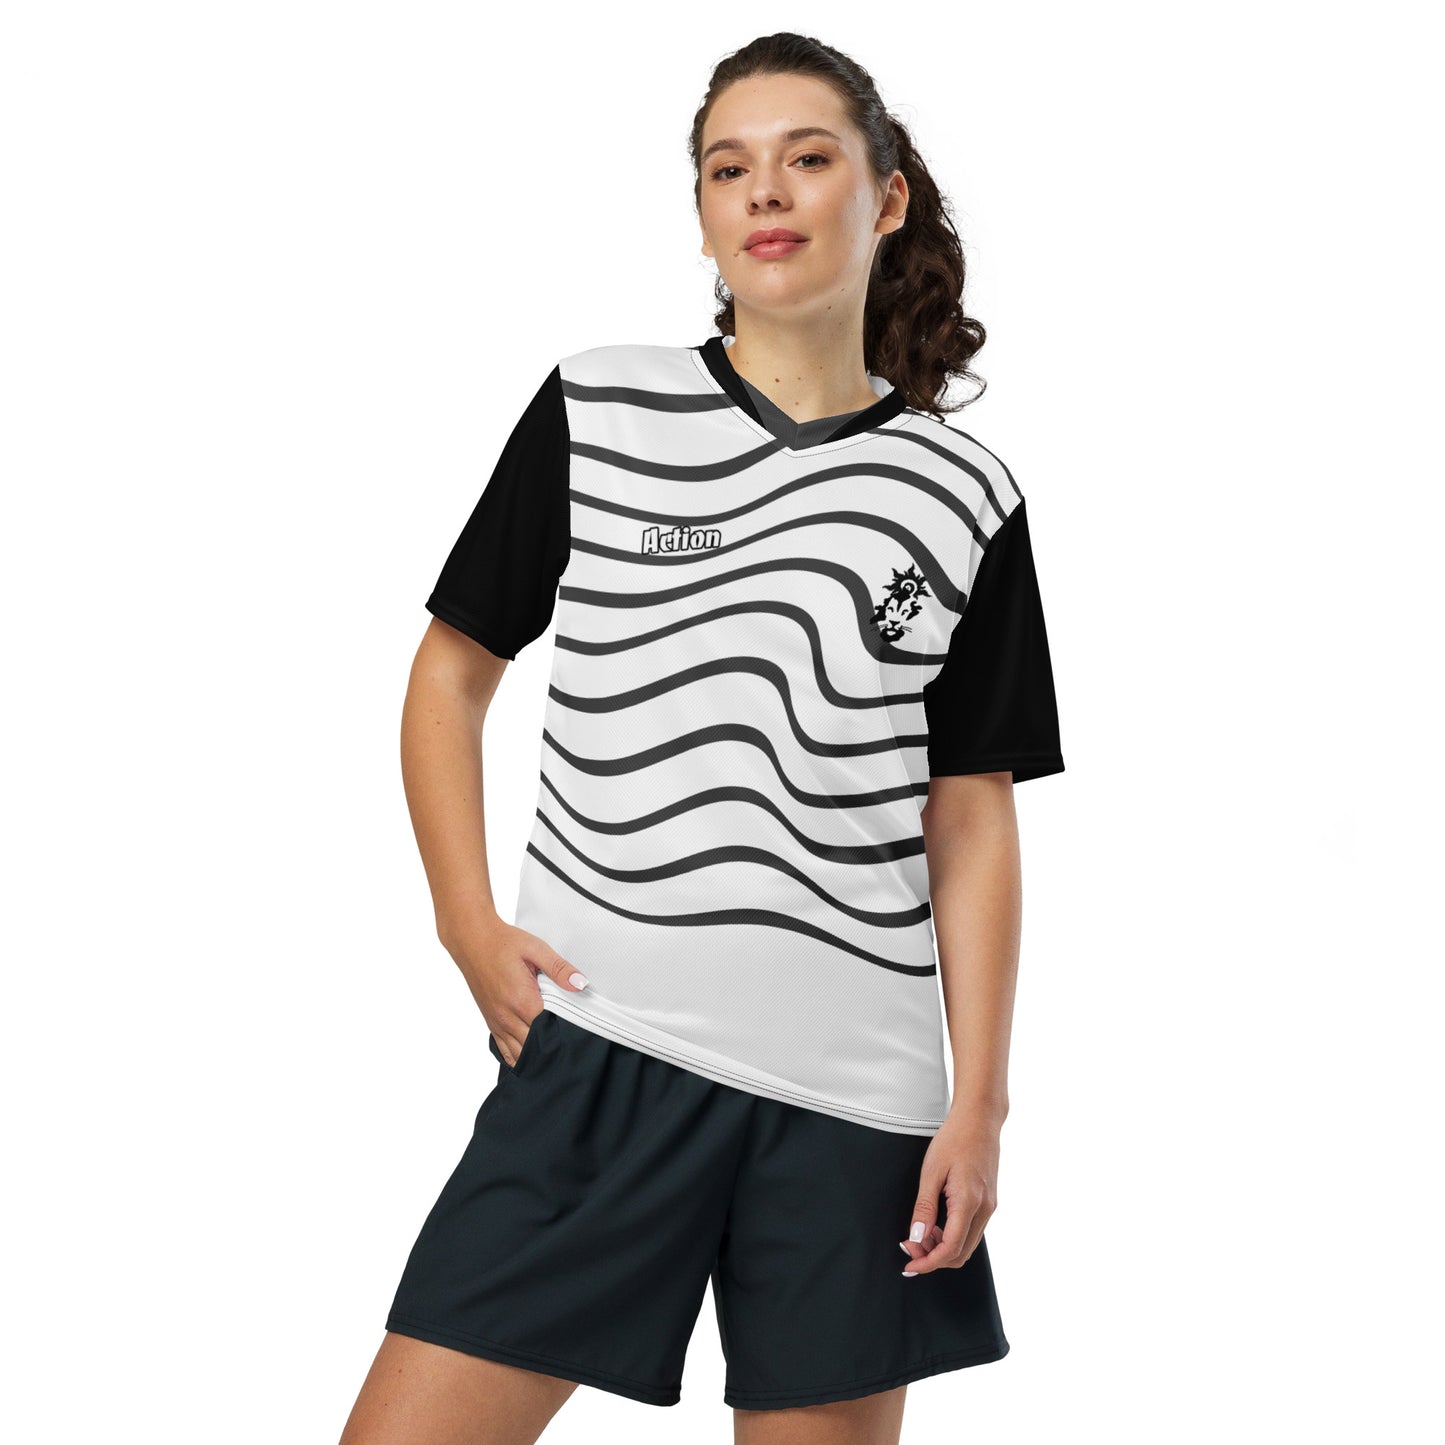 Recycled unisex sports jersey ActSun 7